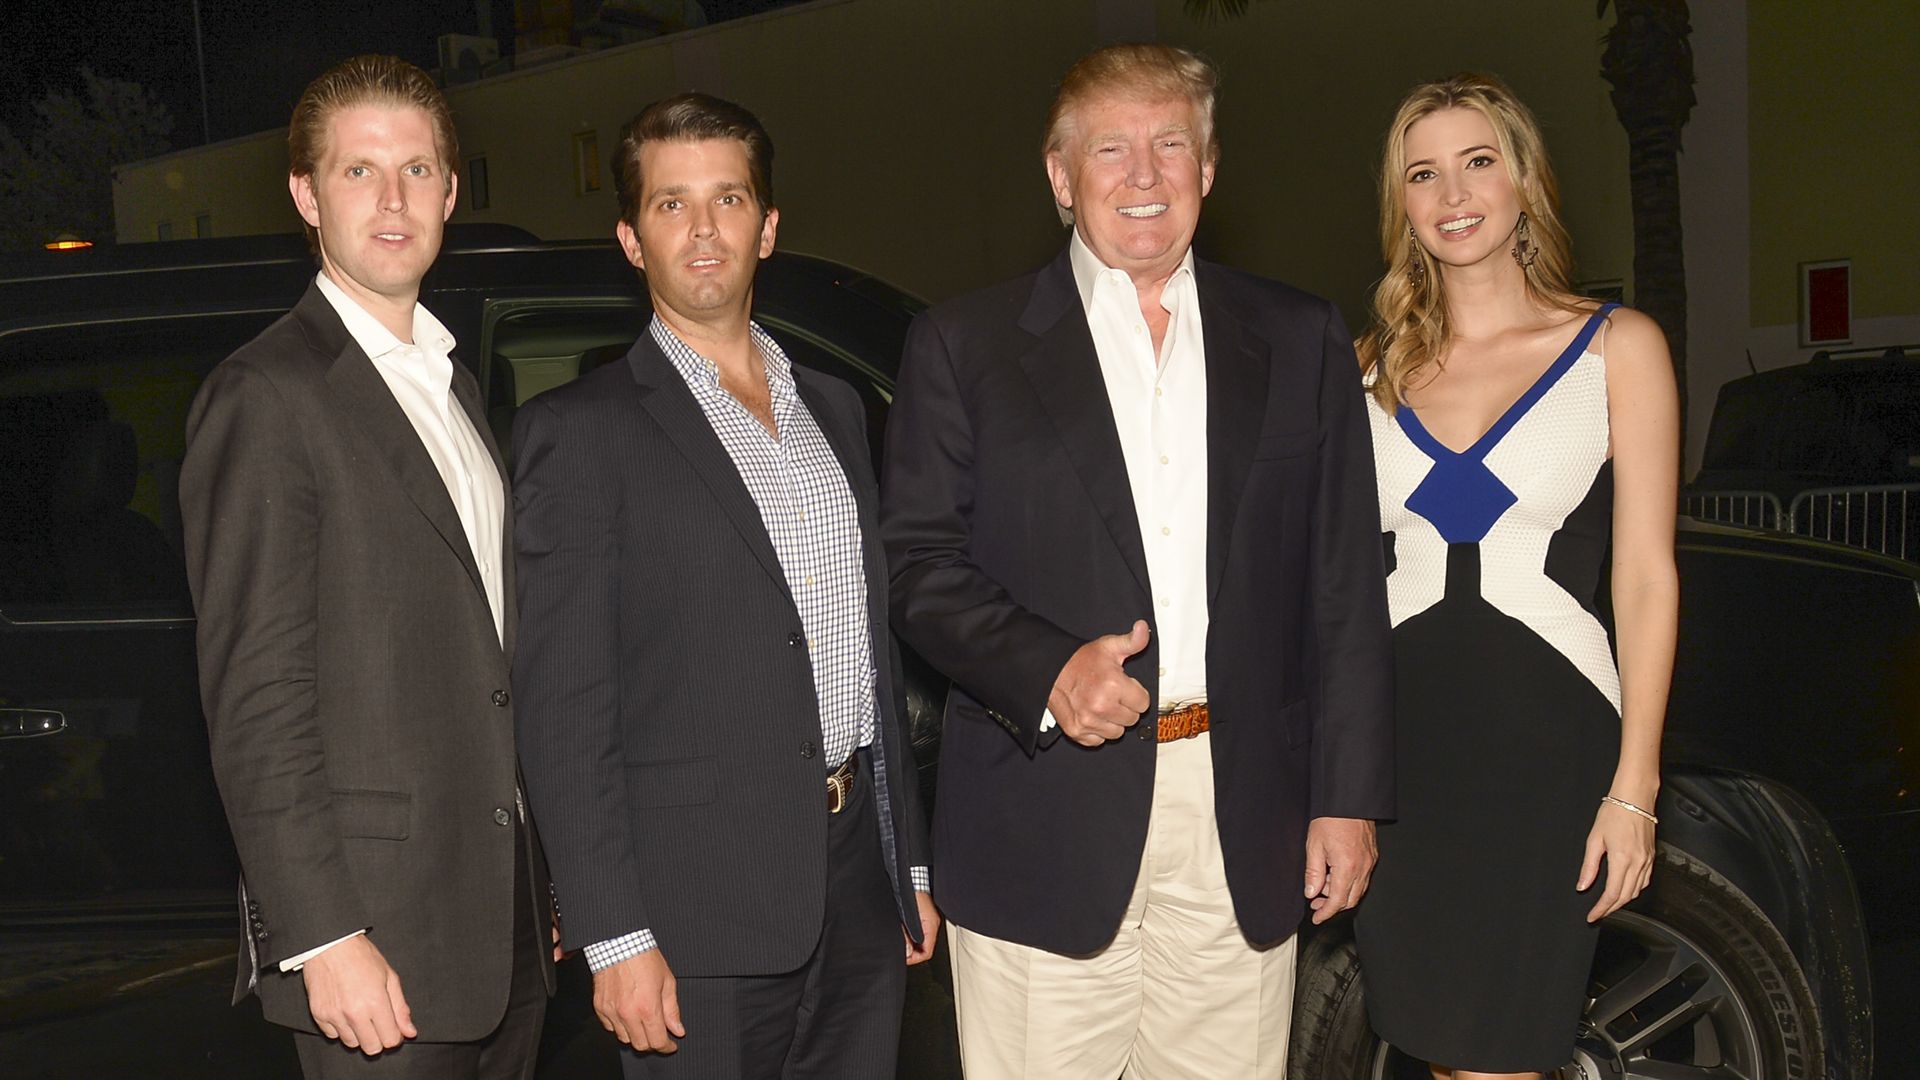 Eric Trump, Donald Trump, Jr., President Trump, and Ivanka Trump arrive to The Opening Drive Party at Hyde Beach on March 4, 2014 in Miami, Florida. 